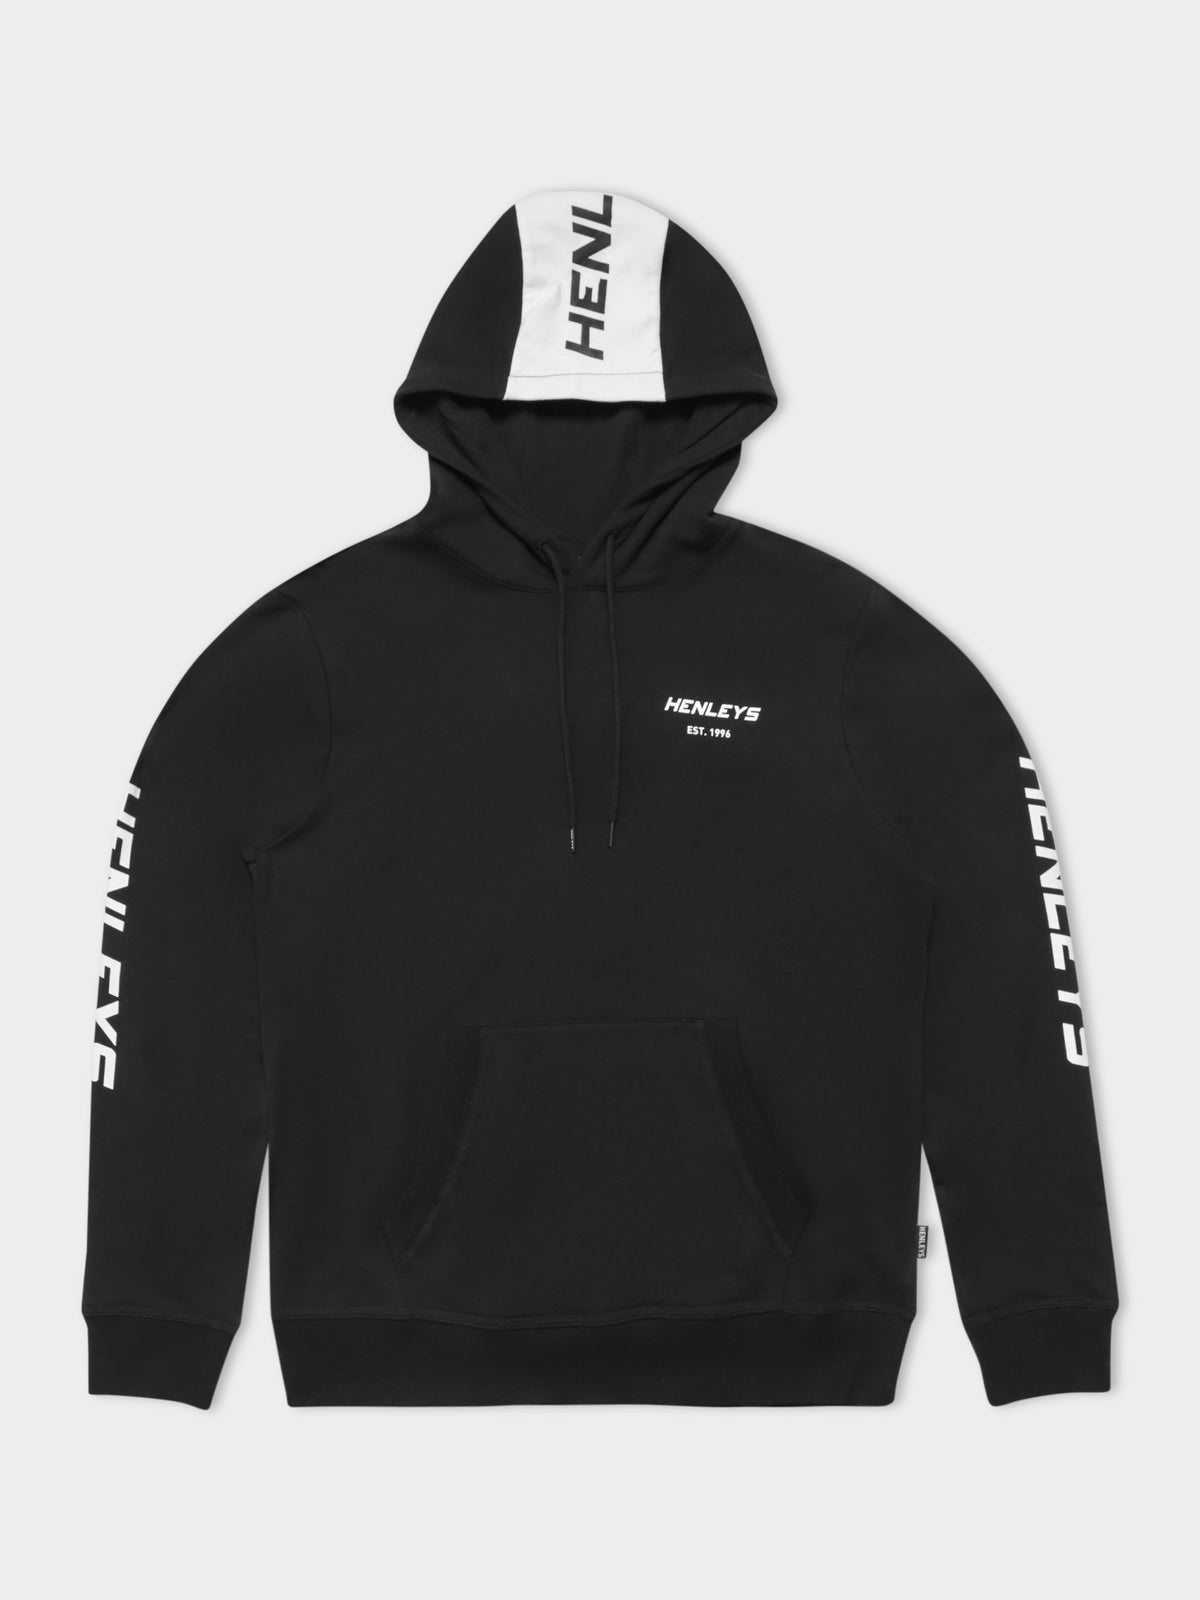 Vice Hooded Sweater in Black